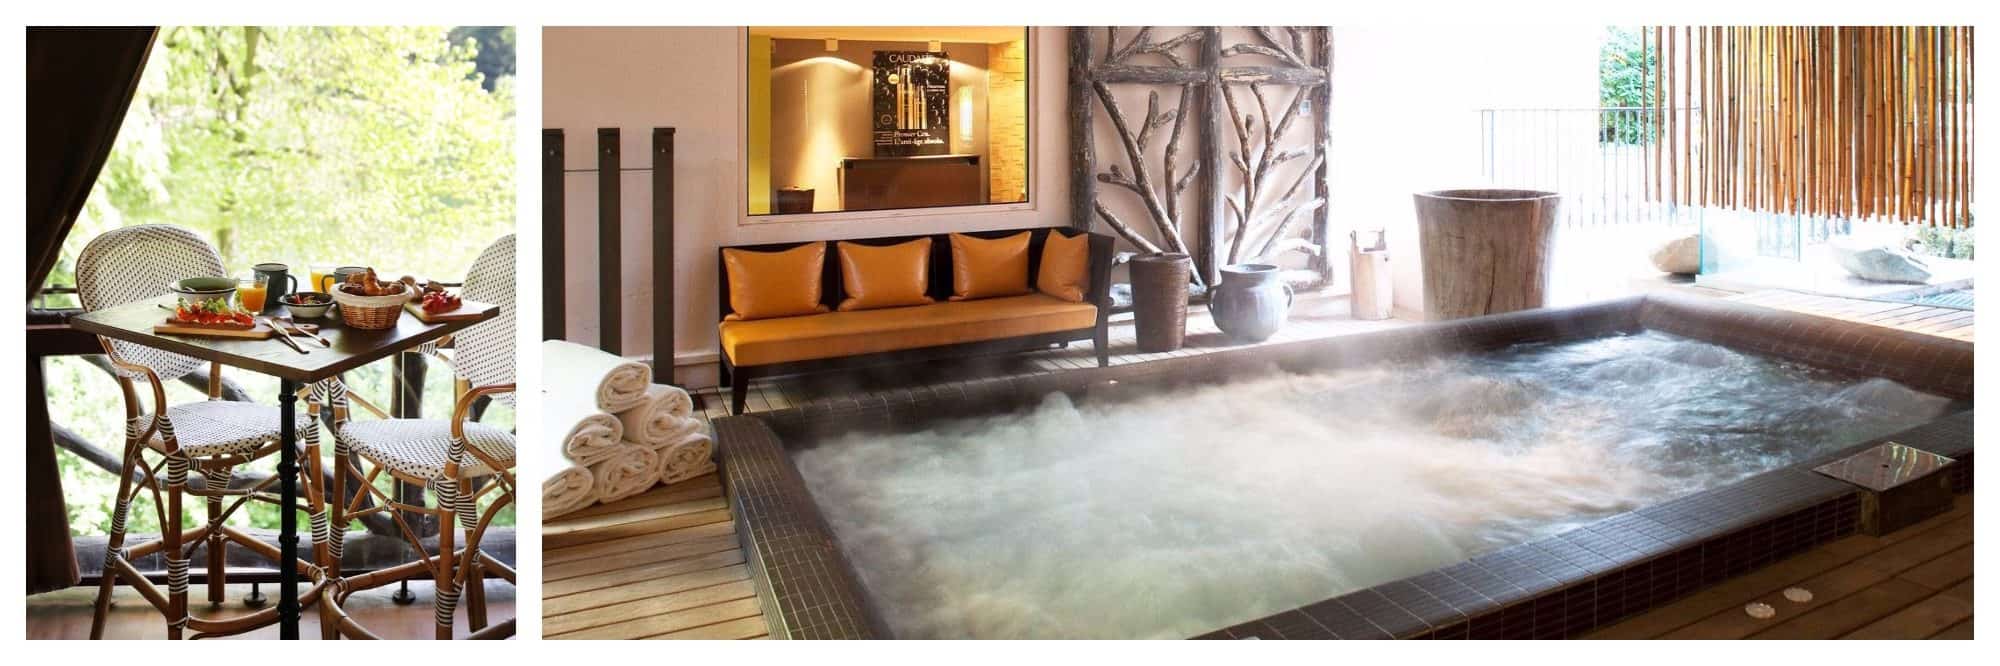 Les Etangs de Corot is popular for its Caudalie spa with a semi-outdoor jacuzzi.